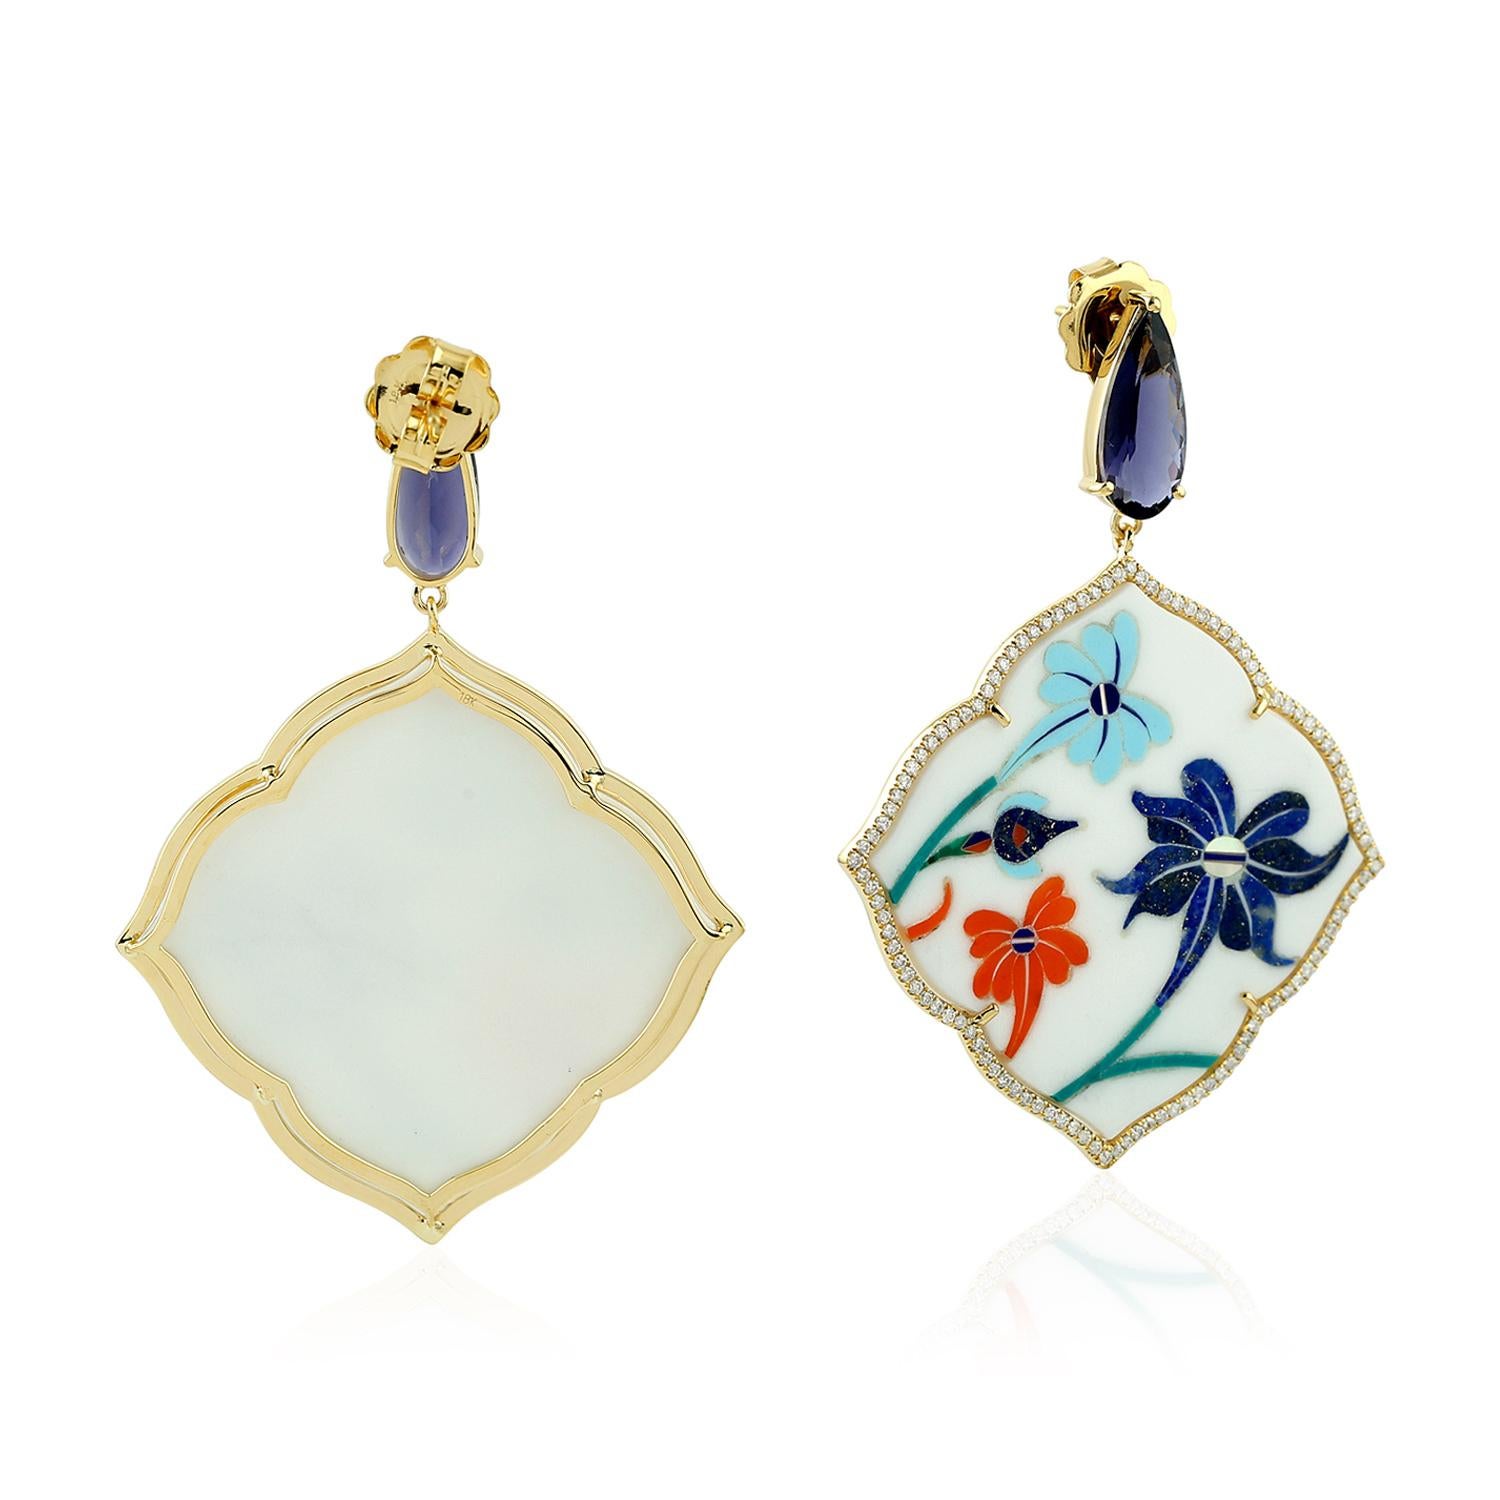 Contemporary 42.35ct Painted Bakelite Dangle Earrings With Iolite & Diamonds in 18k Gold For Sale